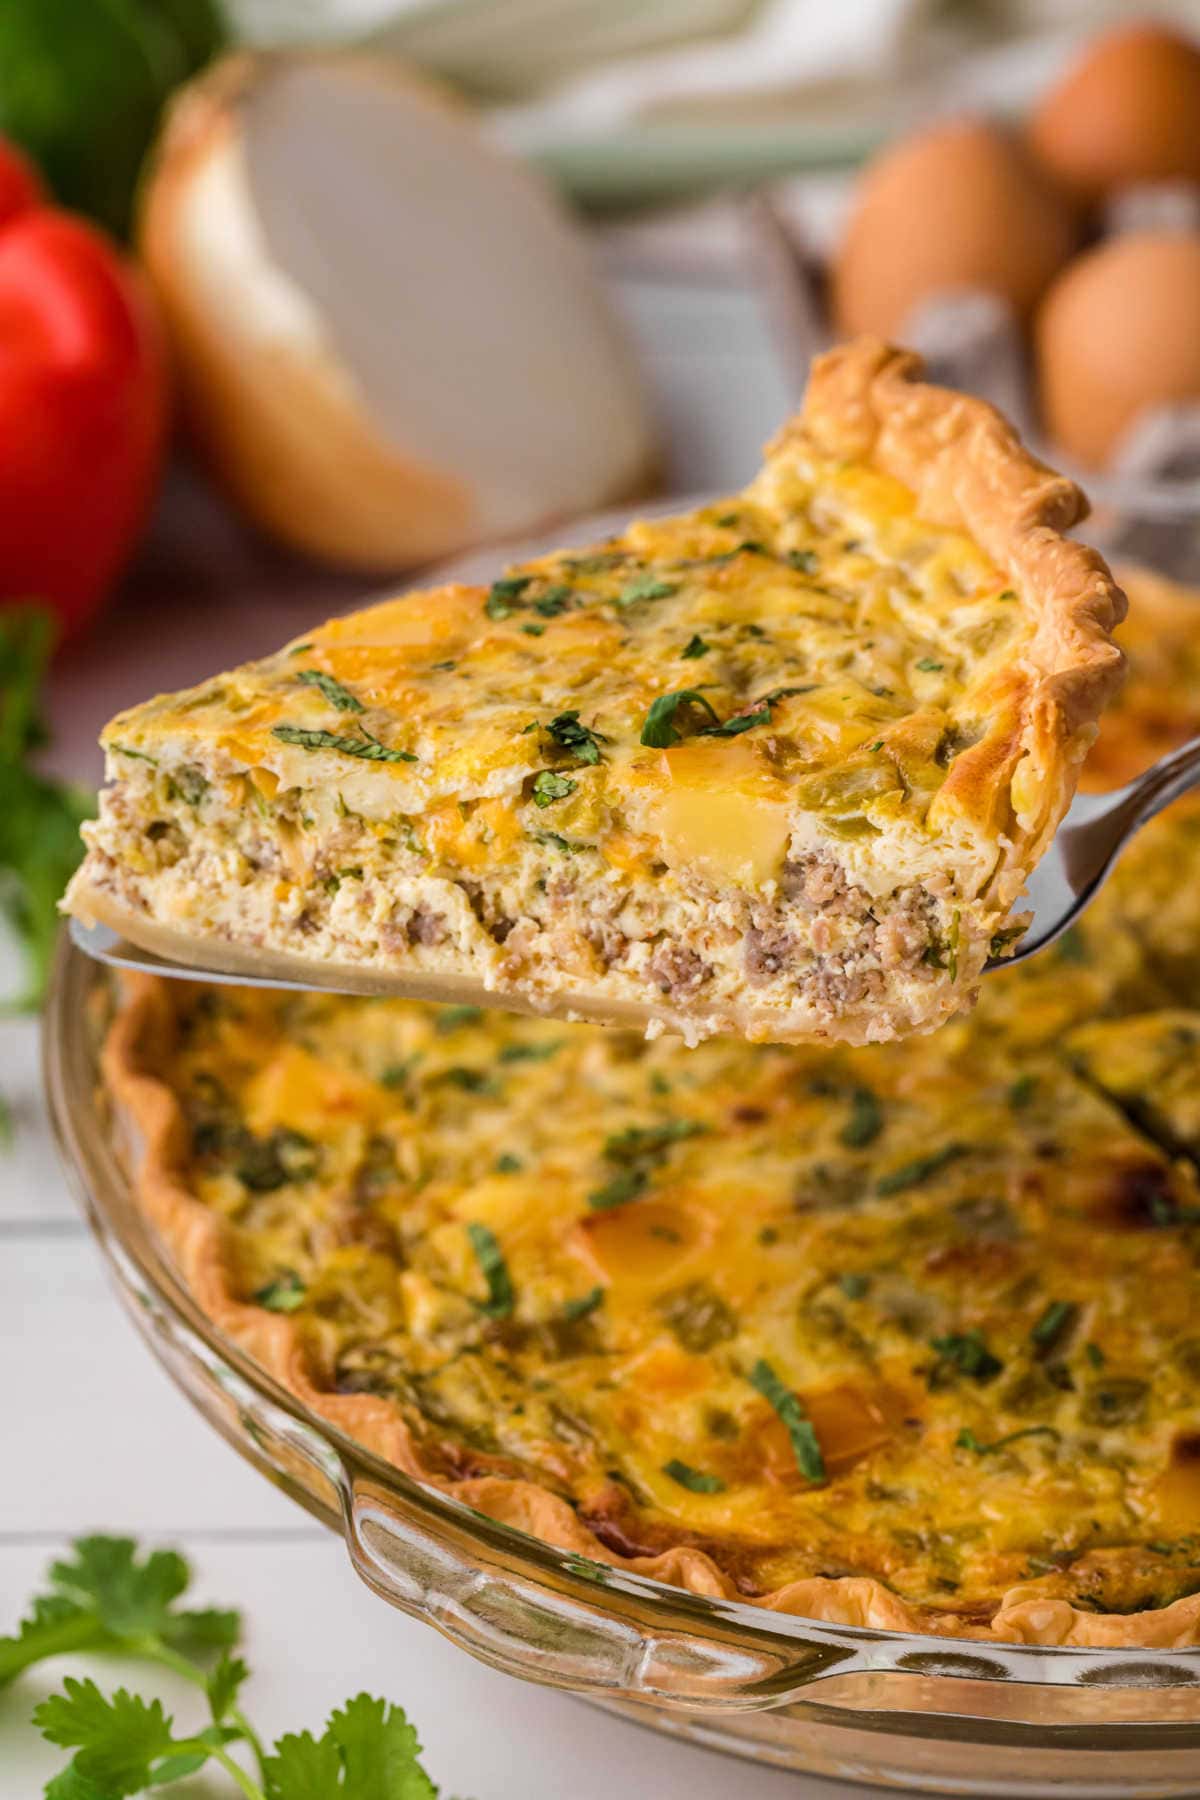 A slice of homemade quiche being served.